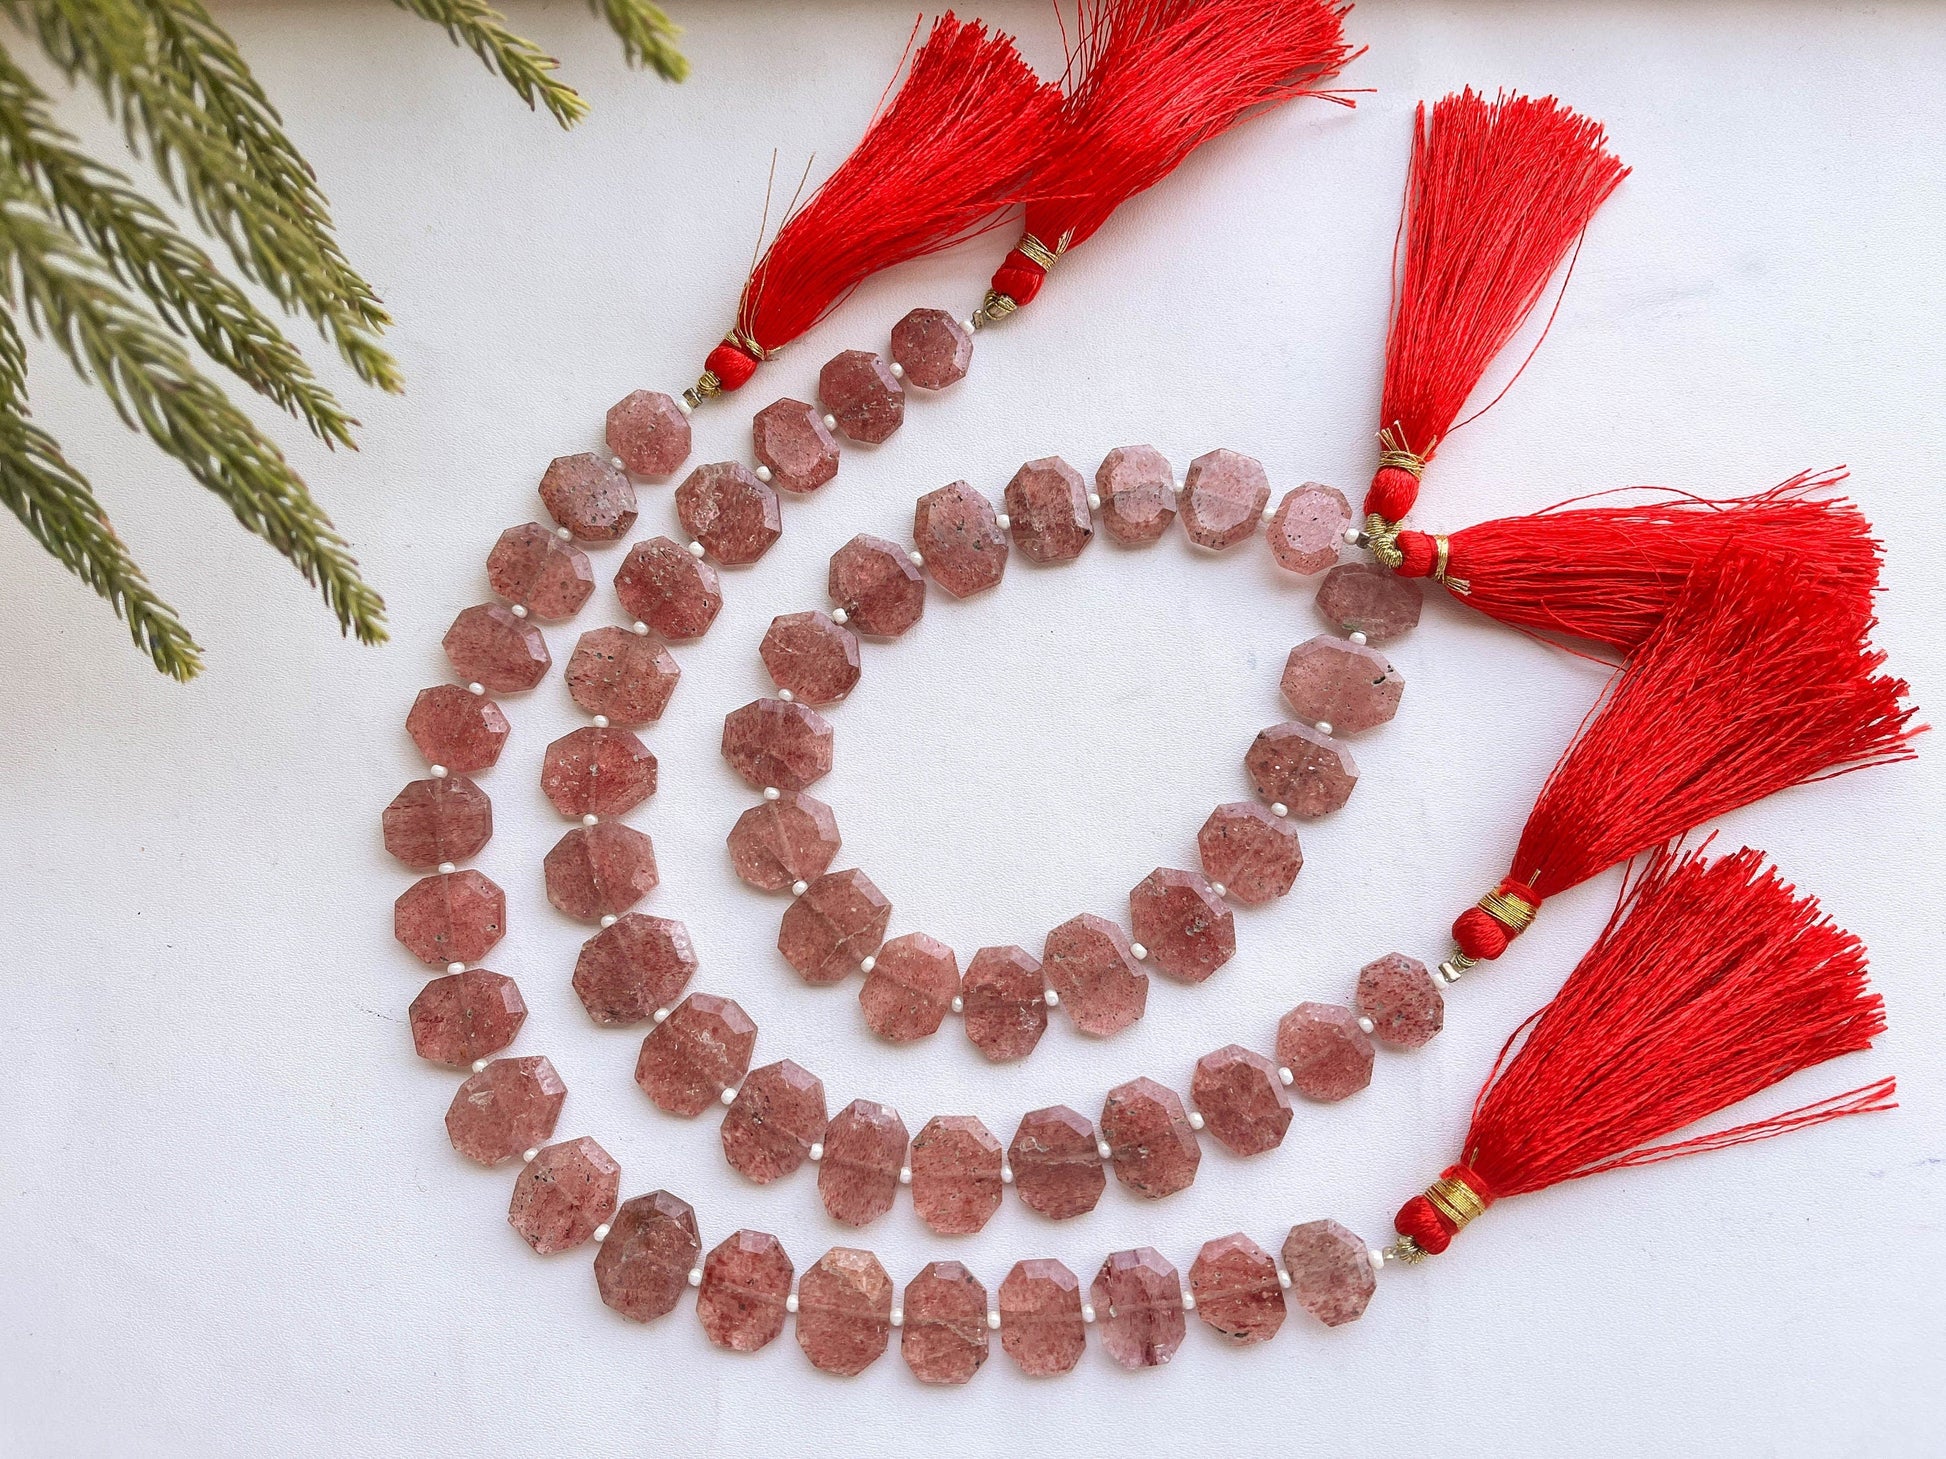 18 Pieces PINK STRAWBERRY QUARTZ Fancy Crown Cut Beads | 8 Inch String | Natural Gemstone Beads | Beadsforyourjewellery Beadsforyourjewelry